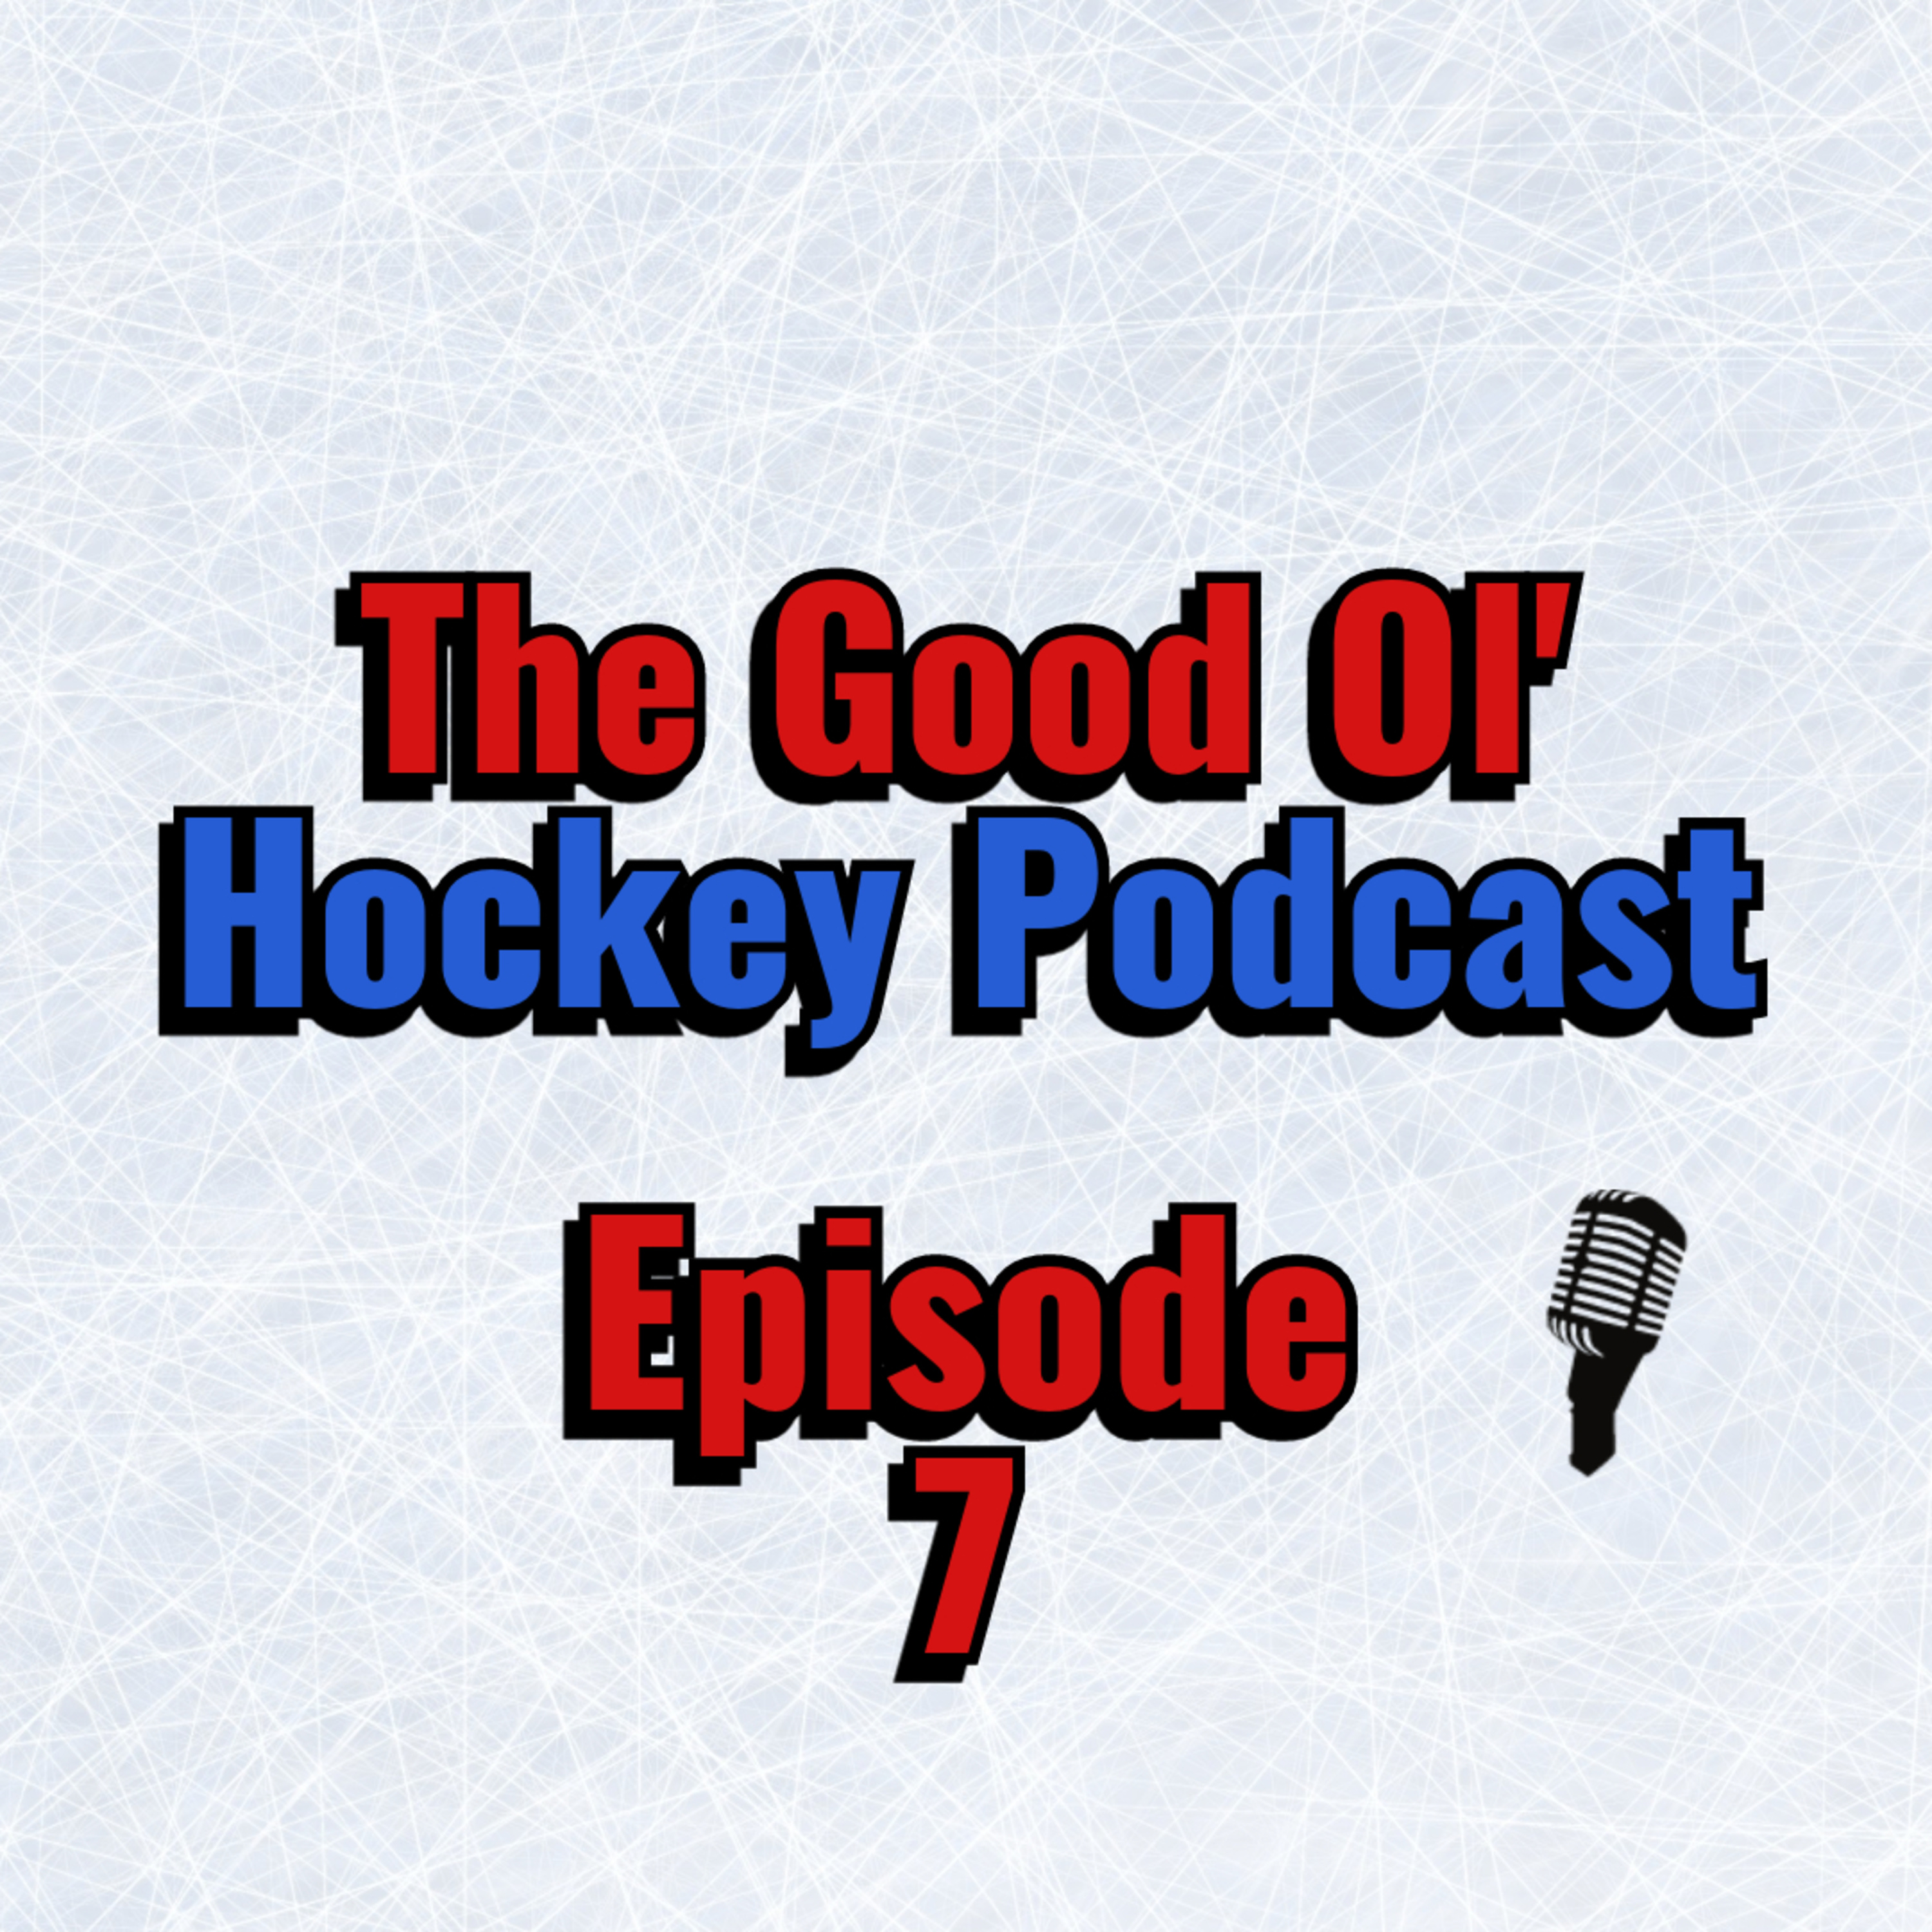 Good Ol' Hockey Podcast Ep. 7: Hot or Not